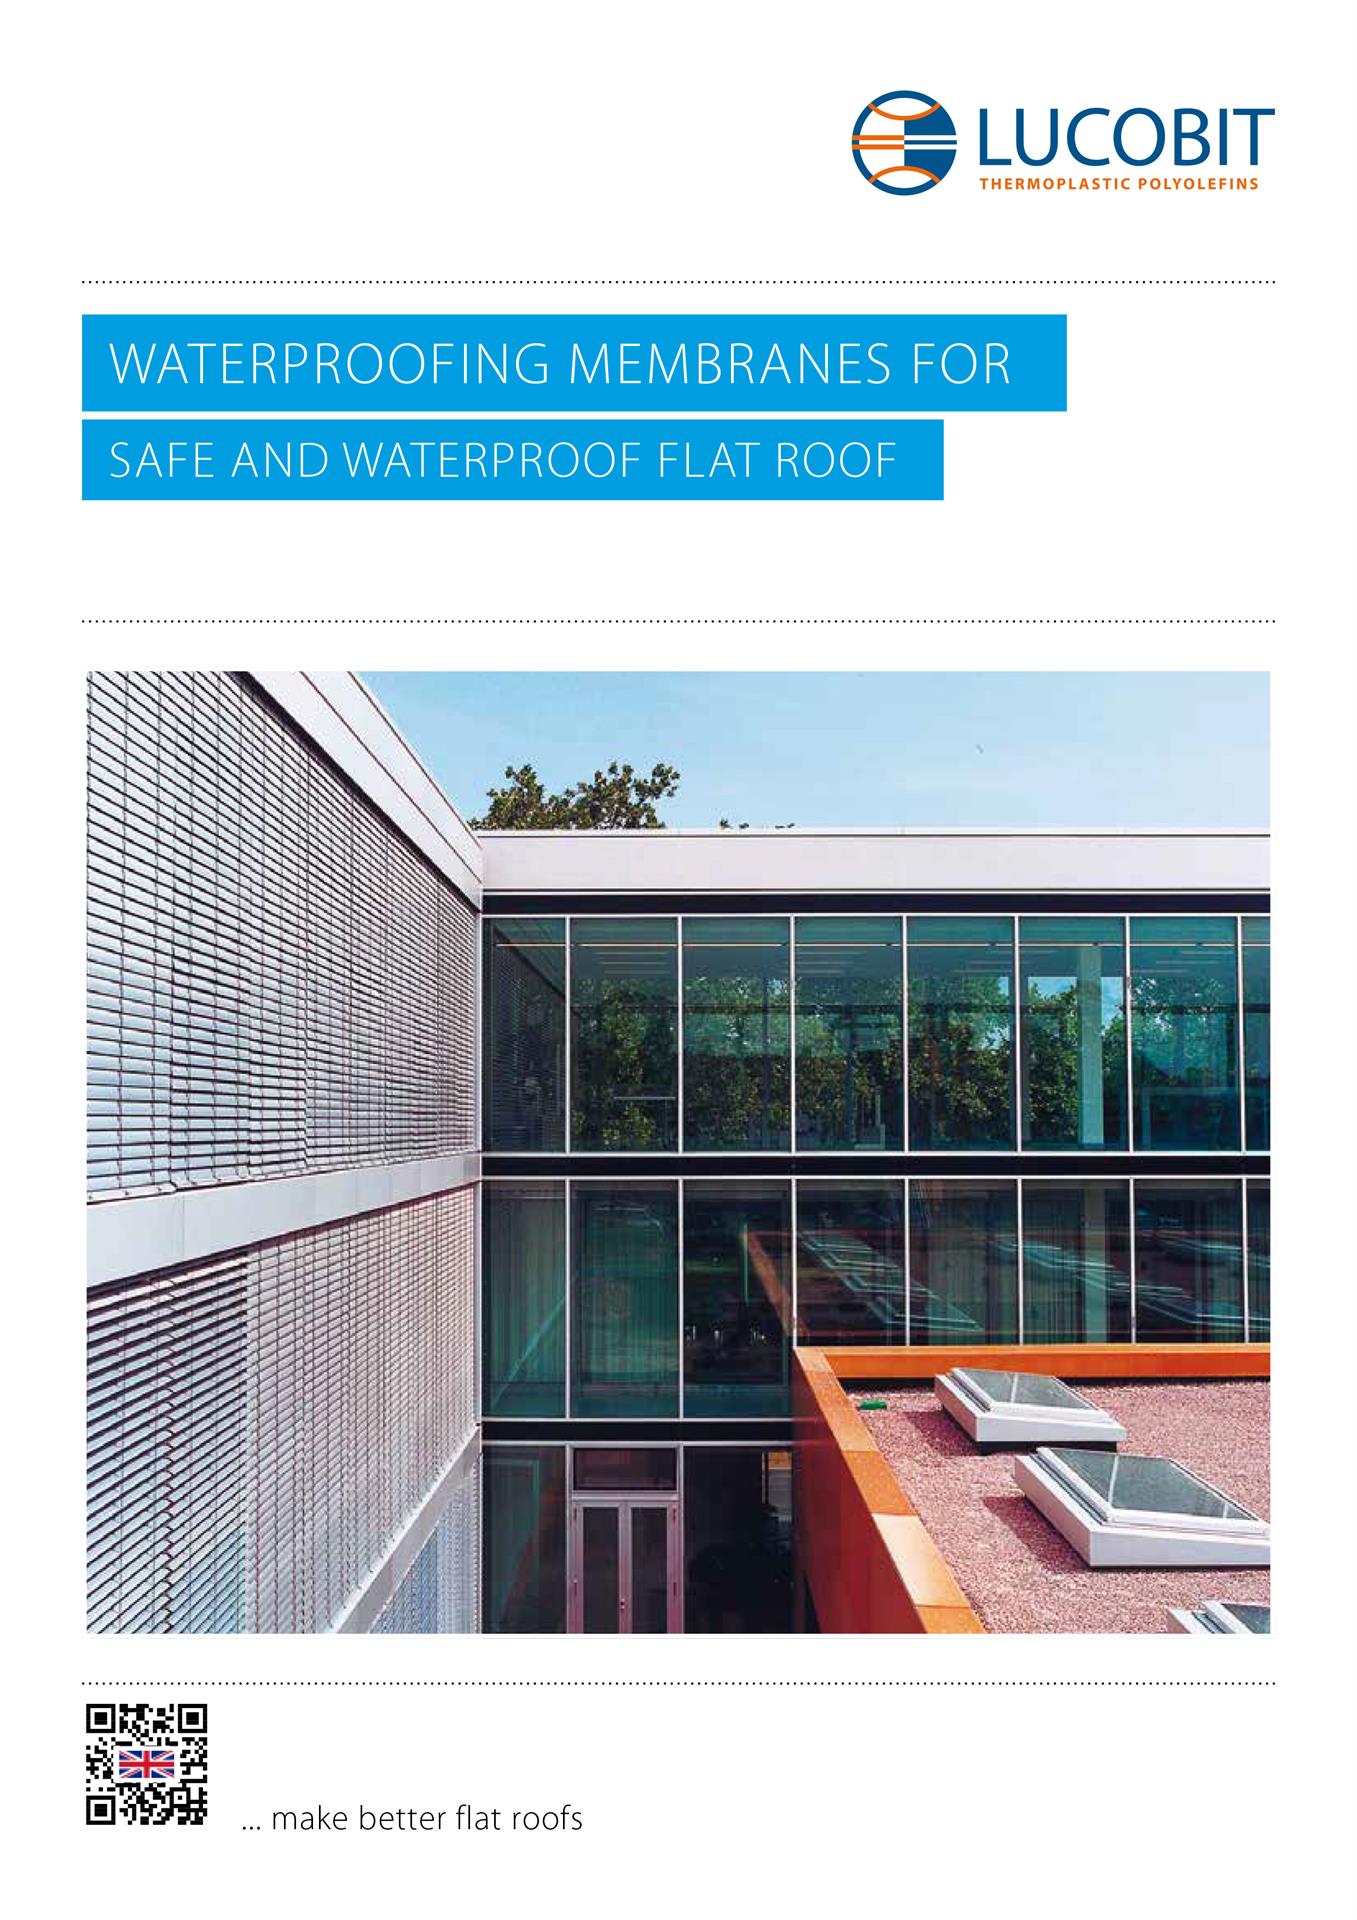 LUCOBIT Brochure - SAFE AND WATERPROOF FLAT ROOF